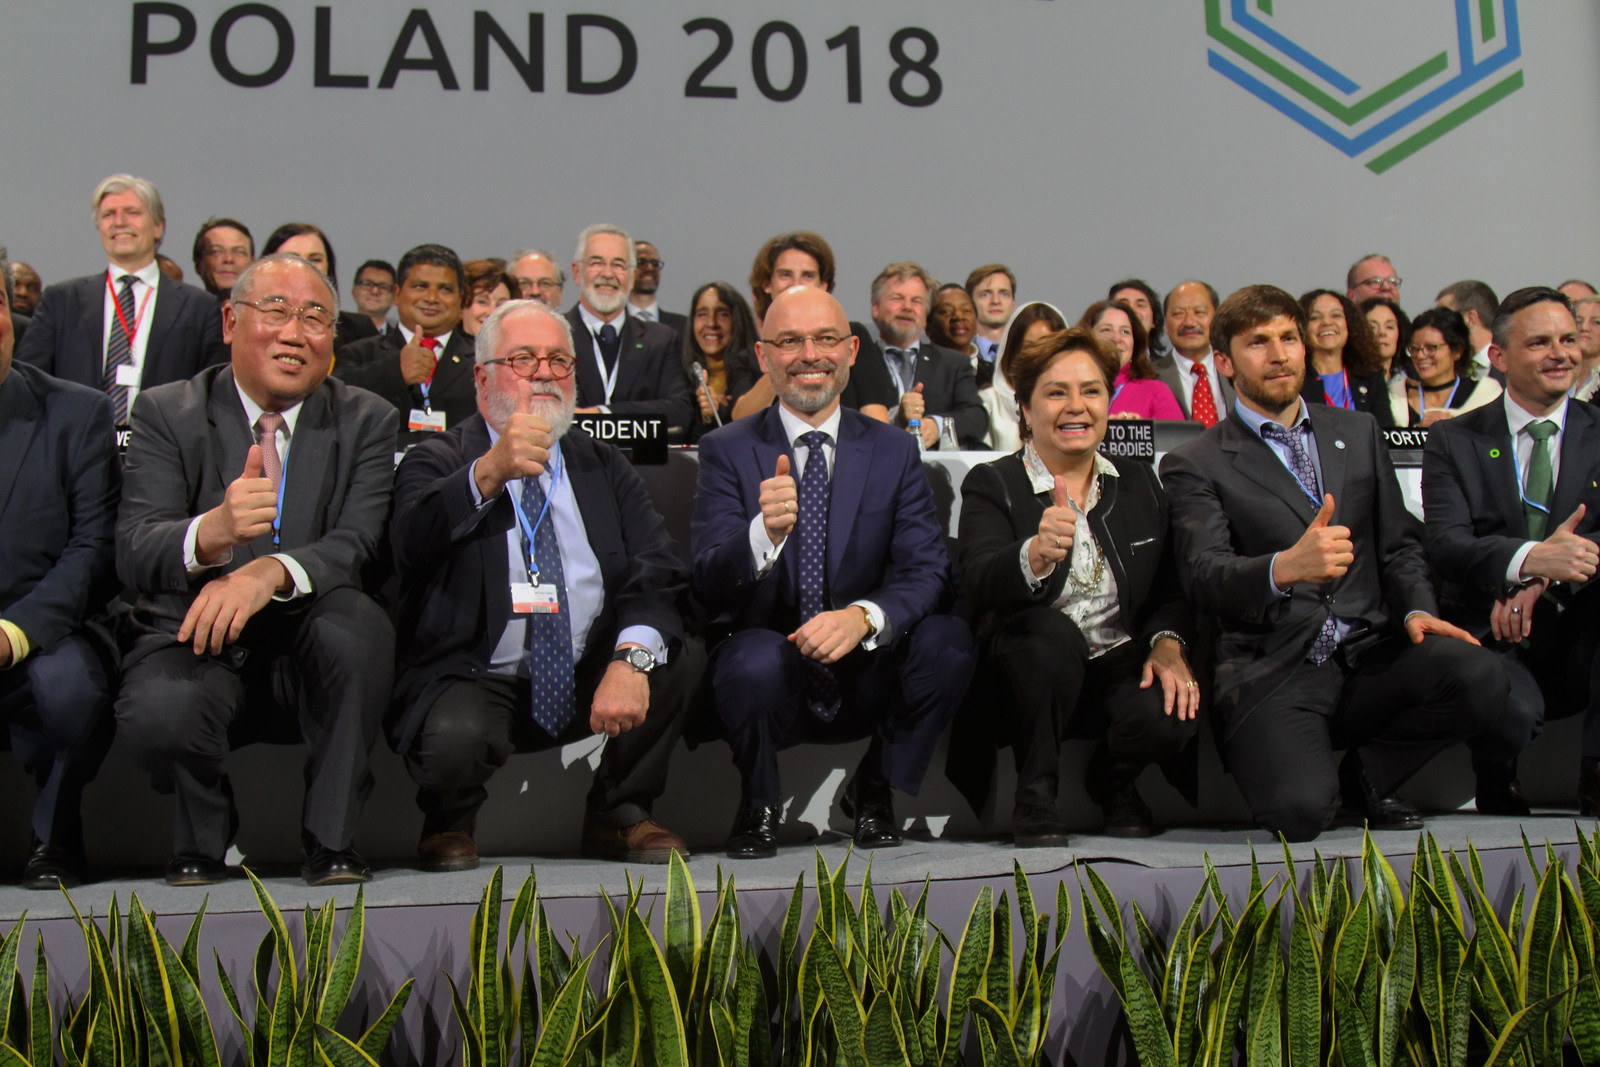 Katowice Climate Change Conference - December 2018